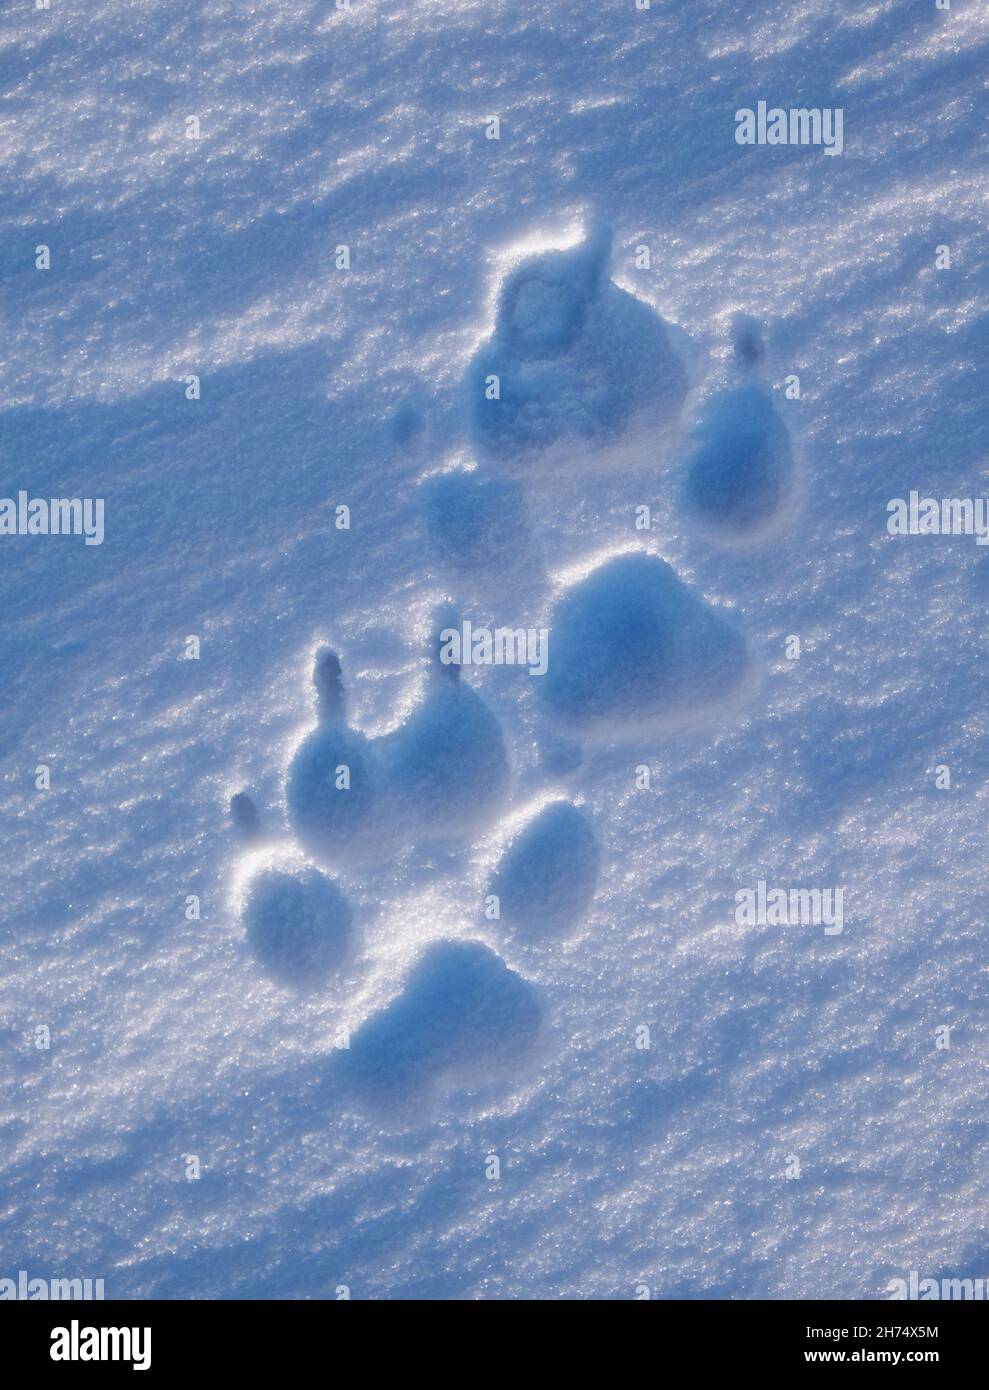 Dog footprint in the snow. Texture of winter snow surface. Blue natural snow background. Stock Photo